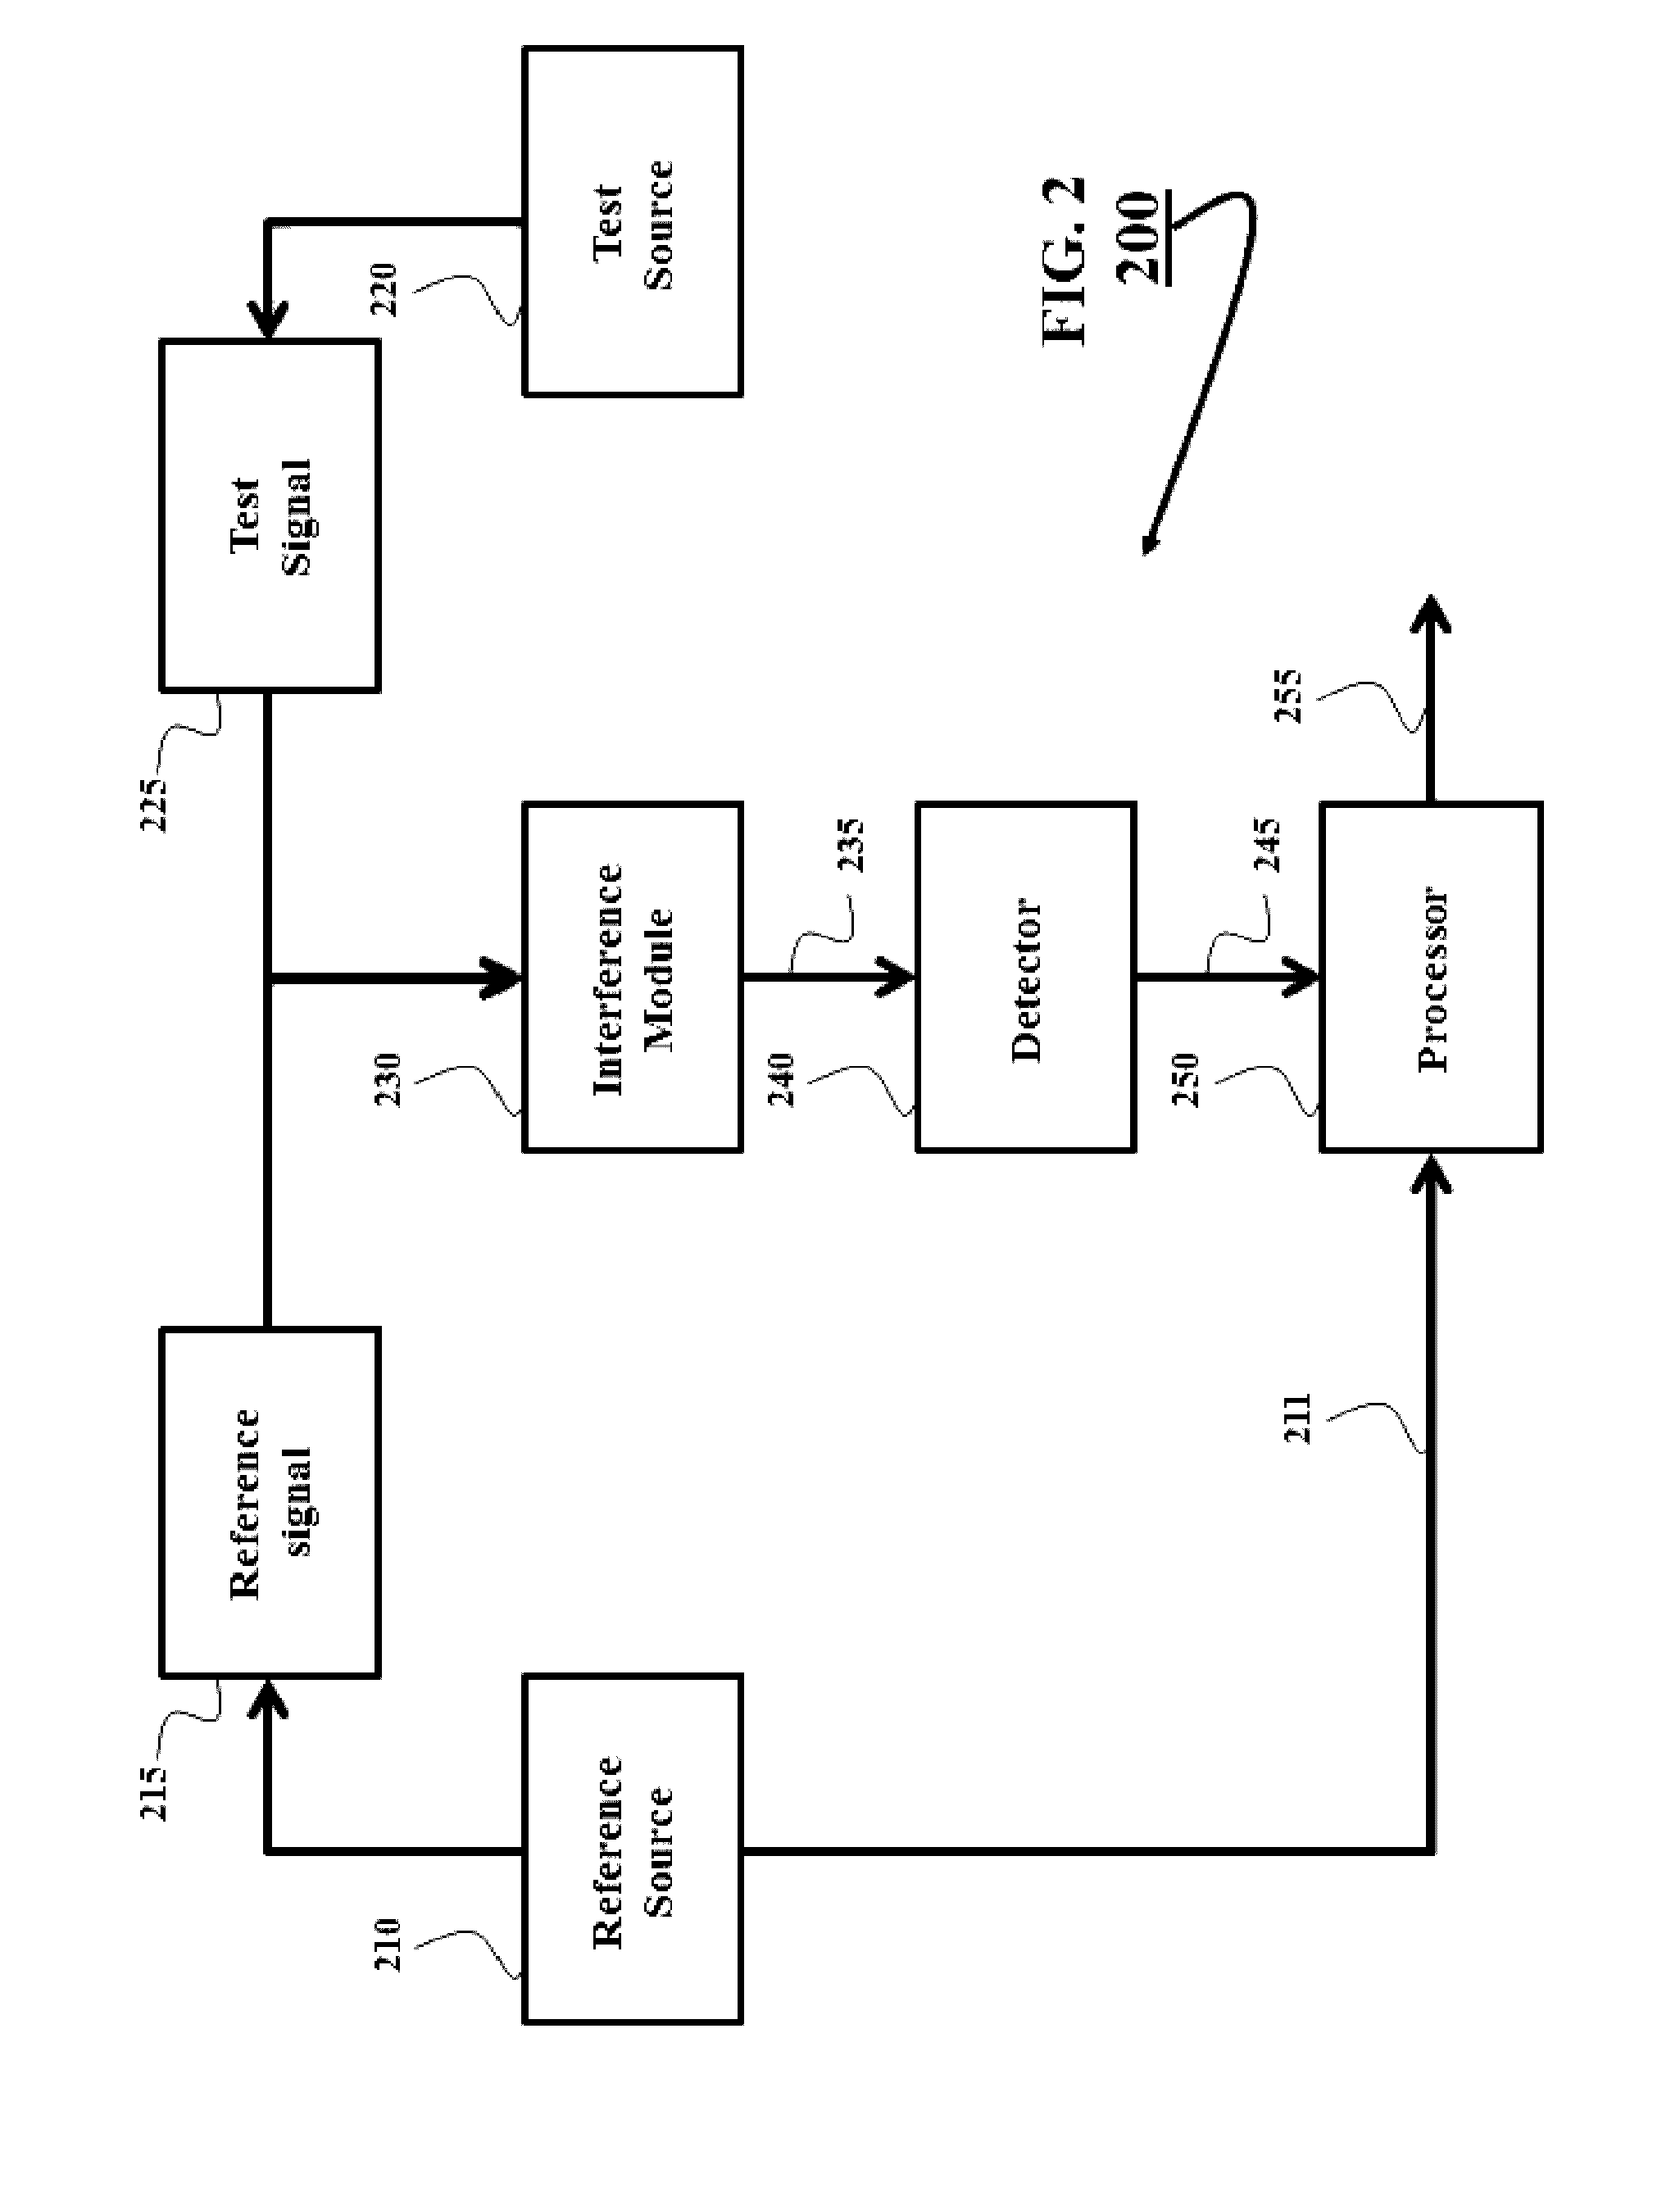 Distance measurement by beating a varying test signal with reference signal having absolute frequency value predetermined with a specified accuracy